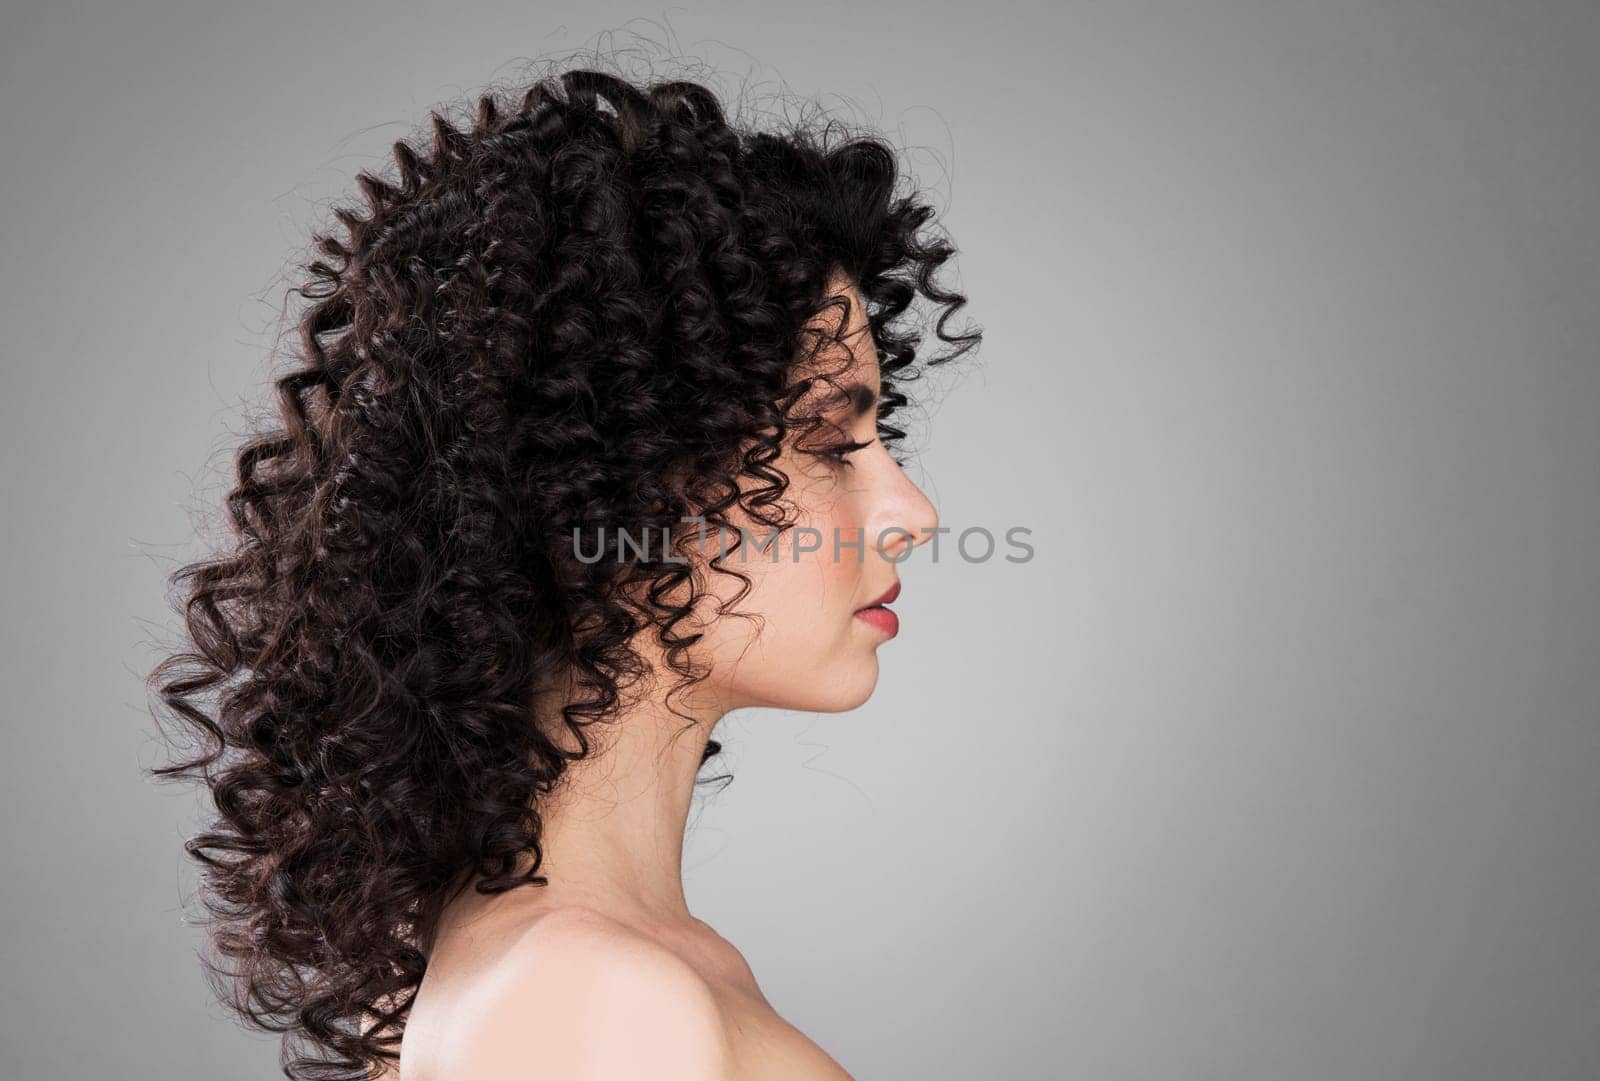 Profile portrait of young caucasian woman with curly hair